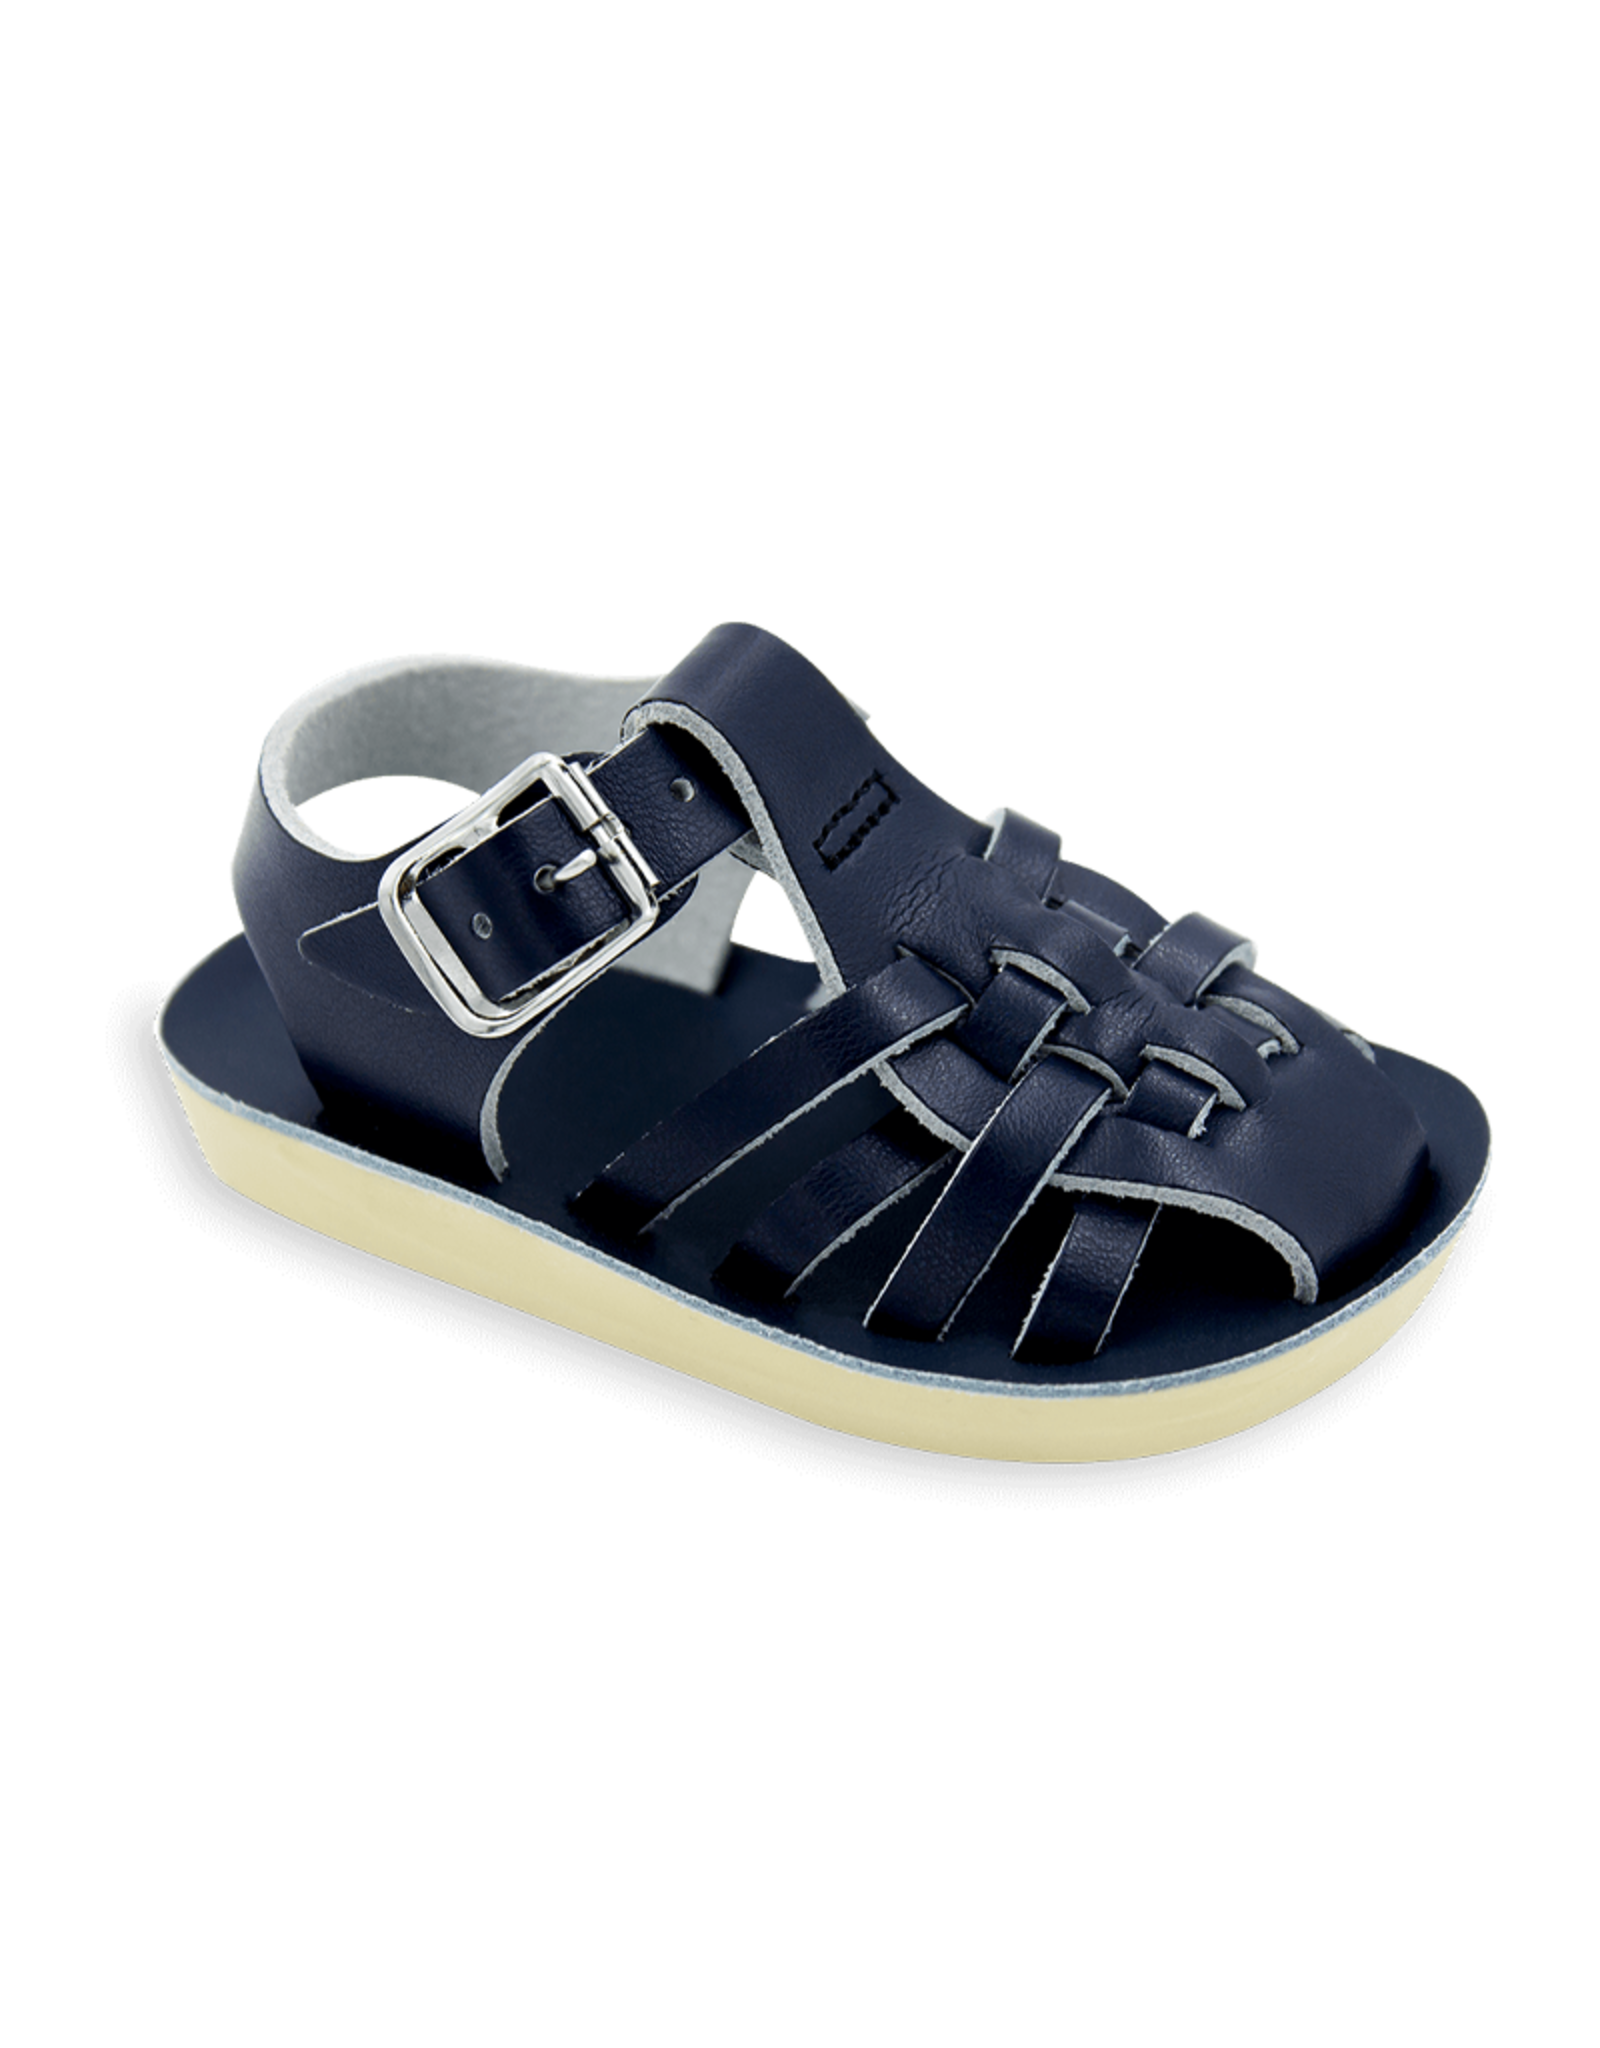 Sun-San Sandals Sailor Baby Navy - Spoiled Sweet Boutique - Spoiled ...